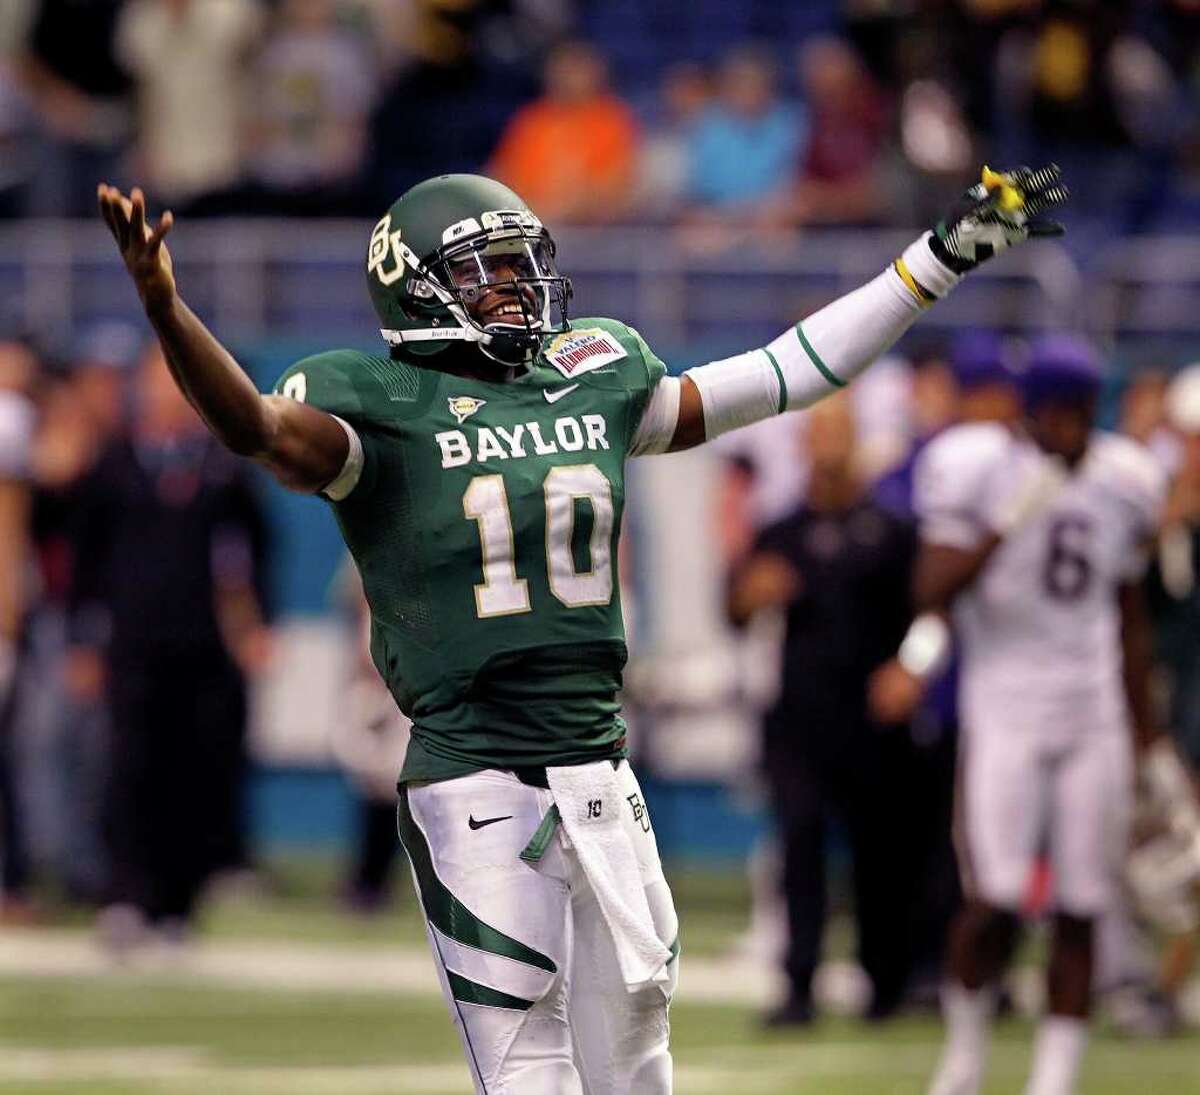 Robert Griffin III raise his arms in celebration as he runs away from players at the end of the game as Baylor beats Washington 67-56 in the Valero Alamo Bowl 2011 at the Alamodome in San Antonio, Texas on December 29, 2011 Tom Reel/Staff